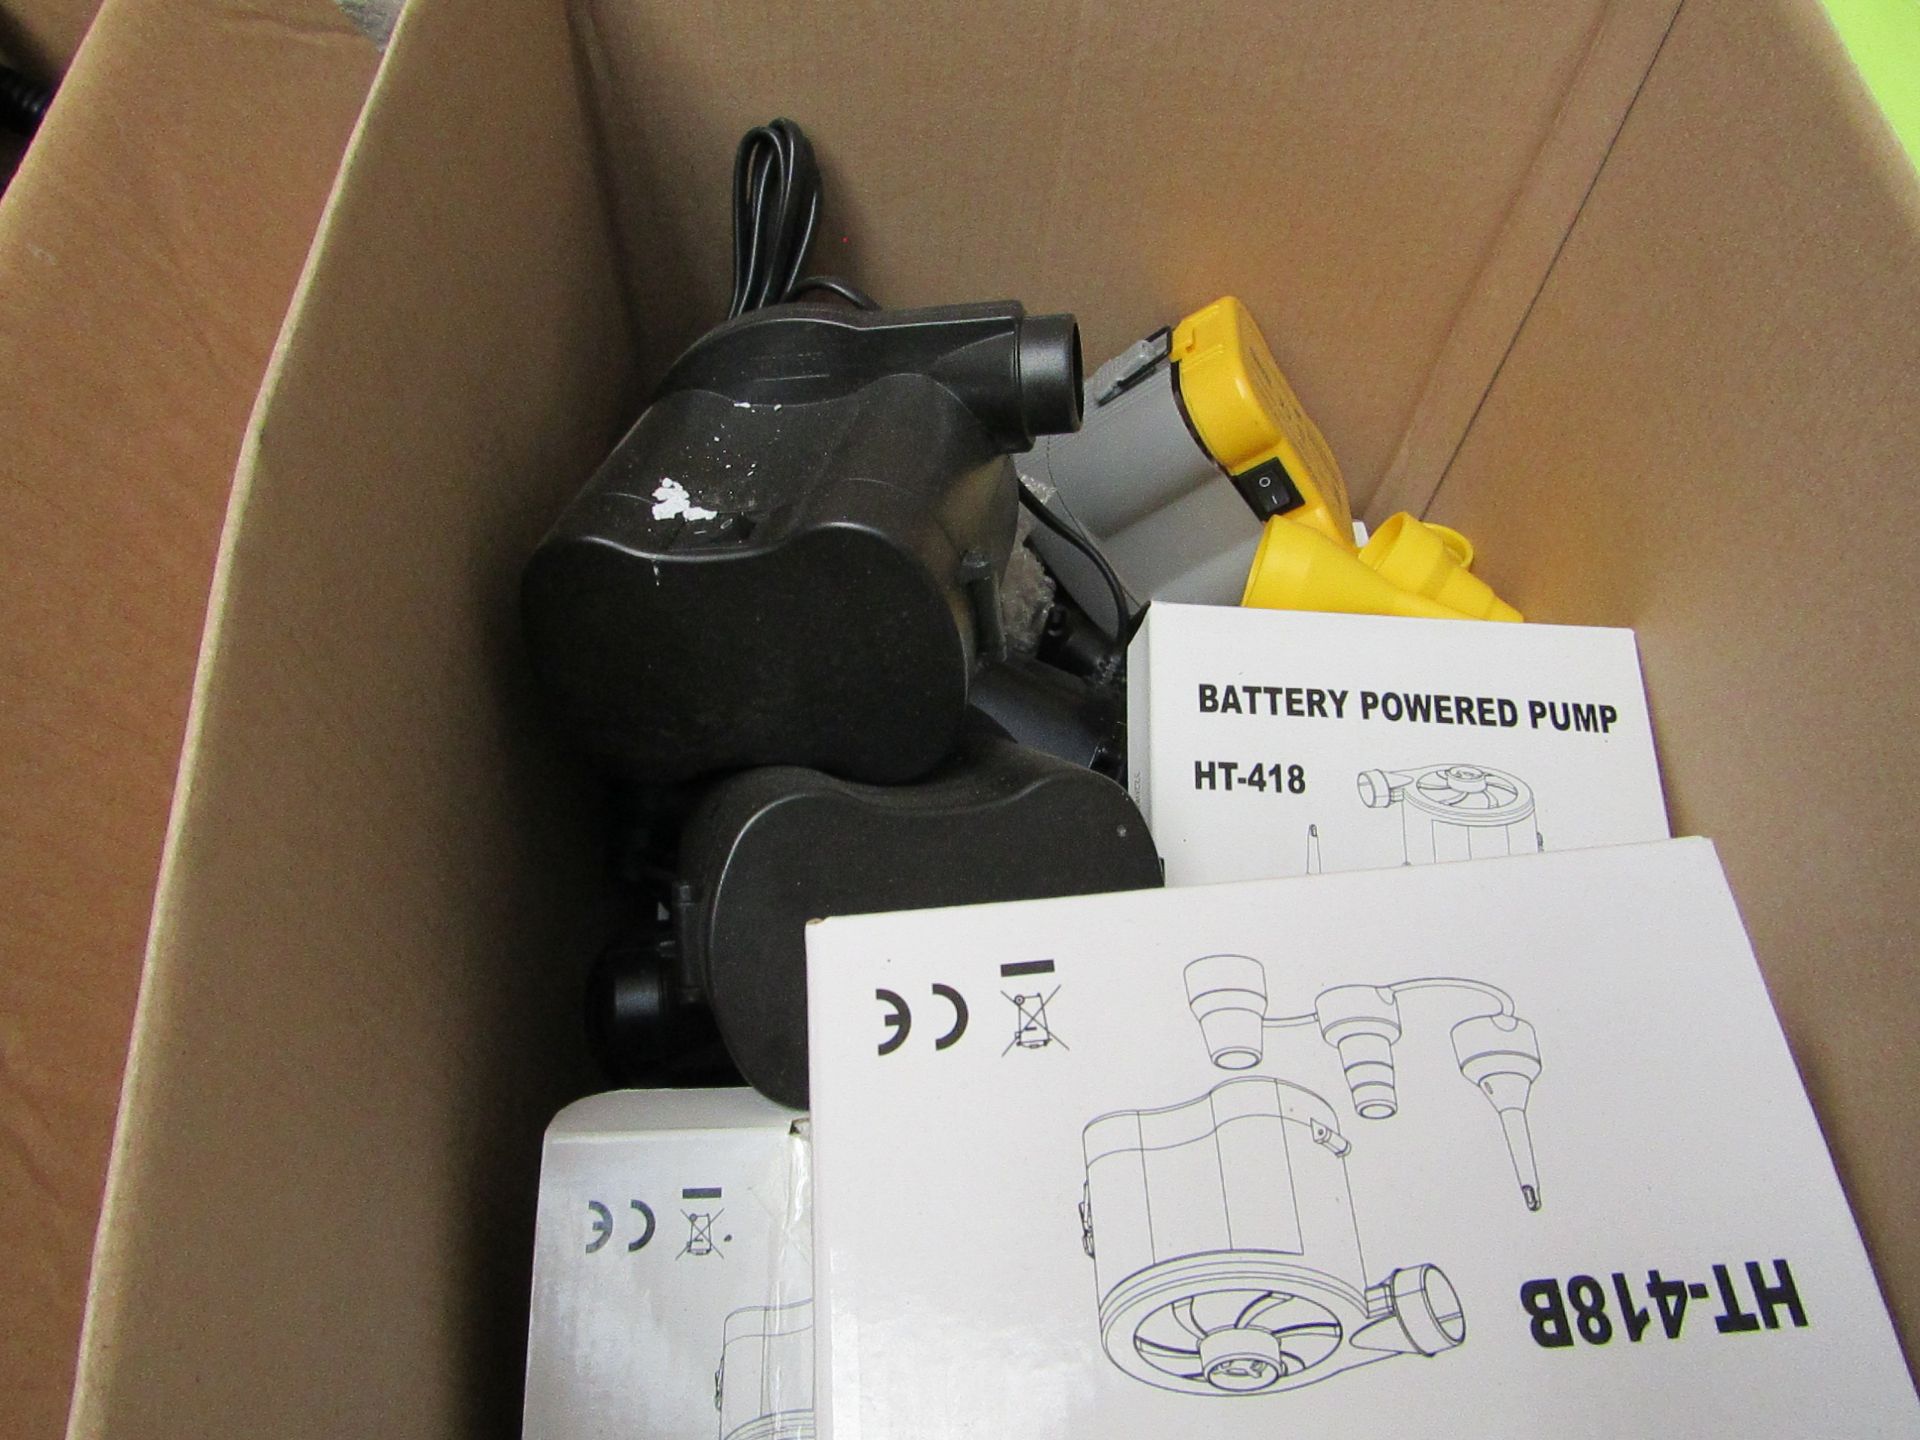 Approx 10x battery powered pumps, all untested.